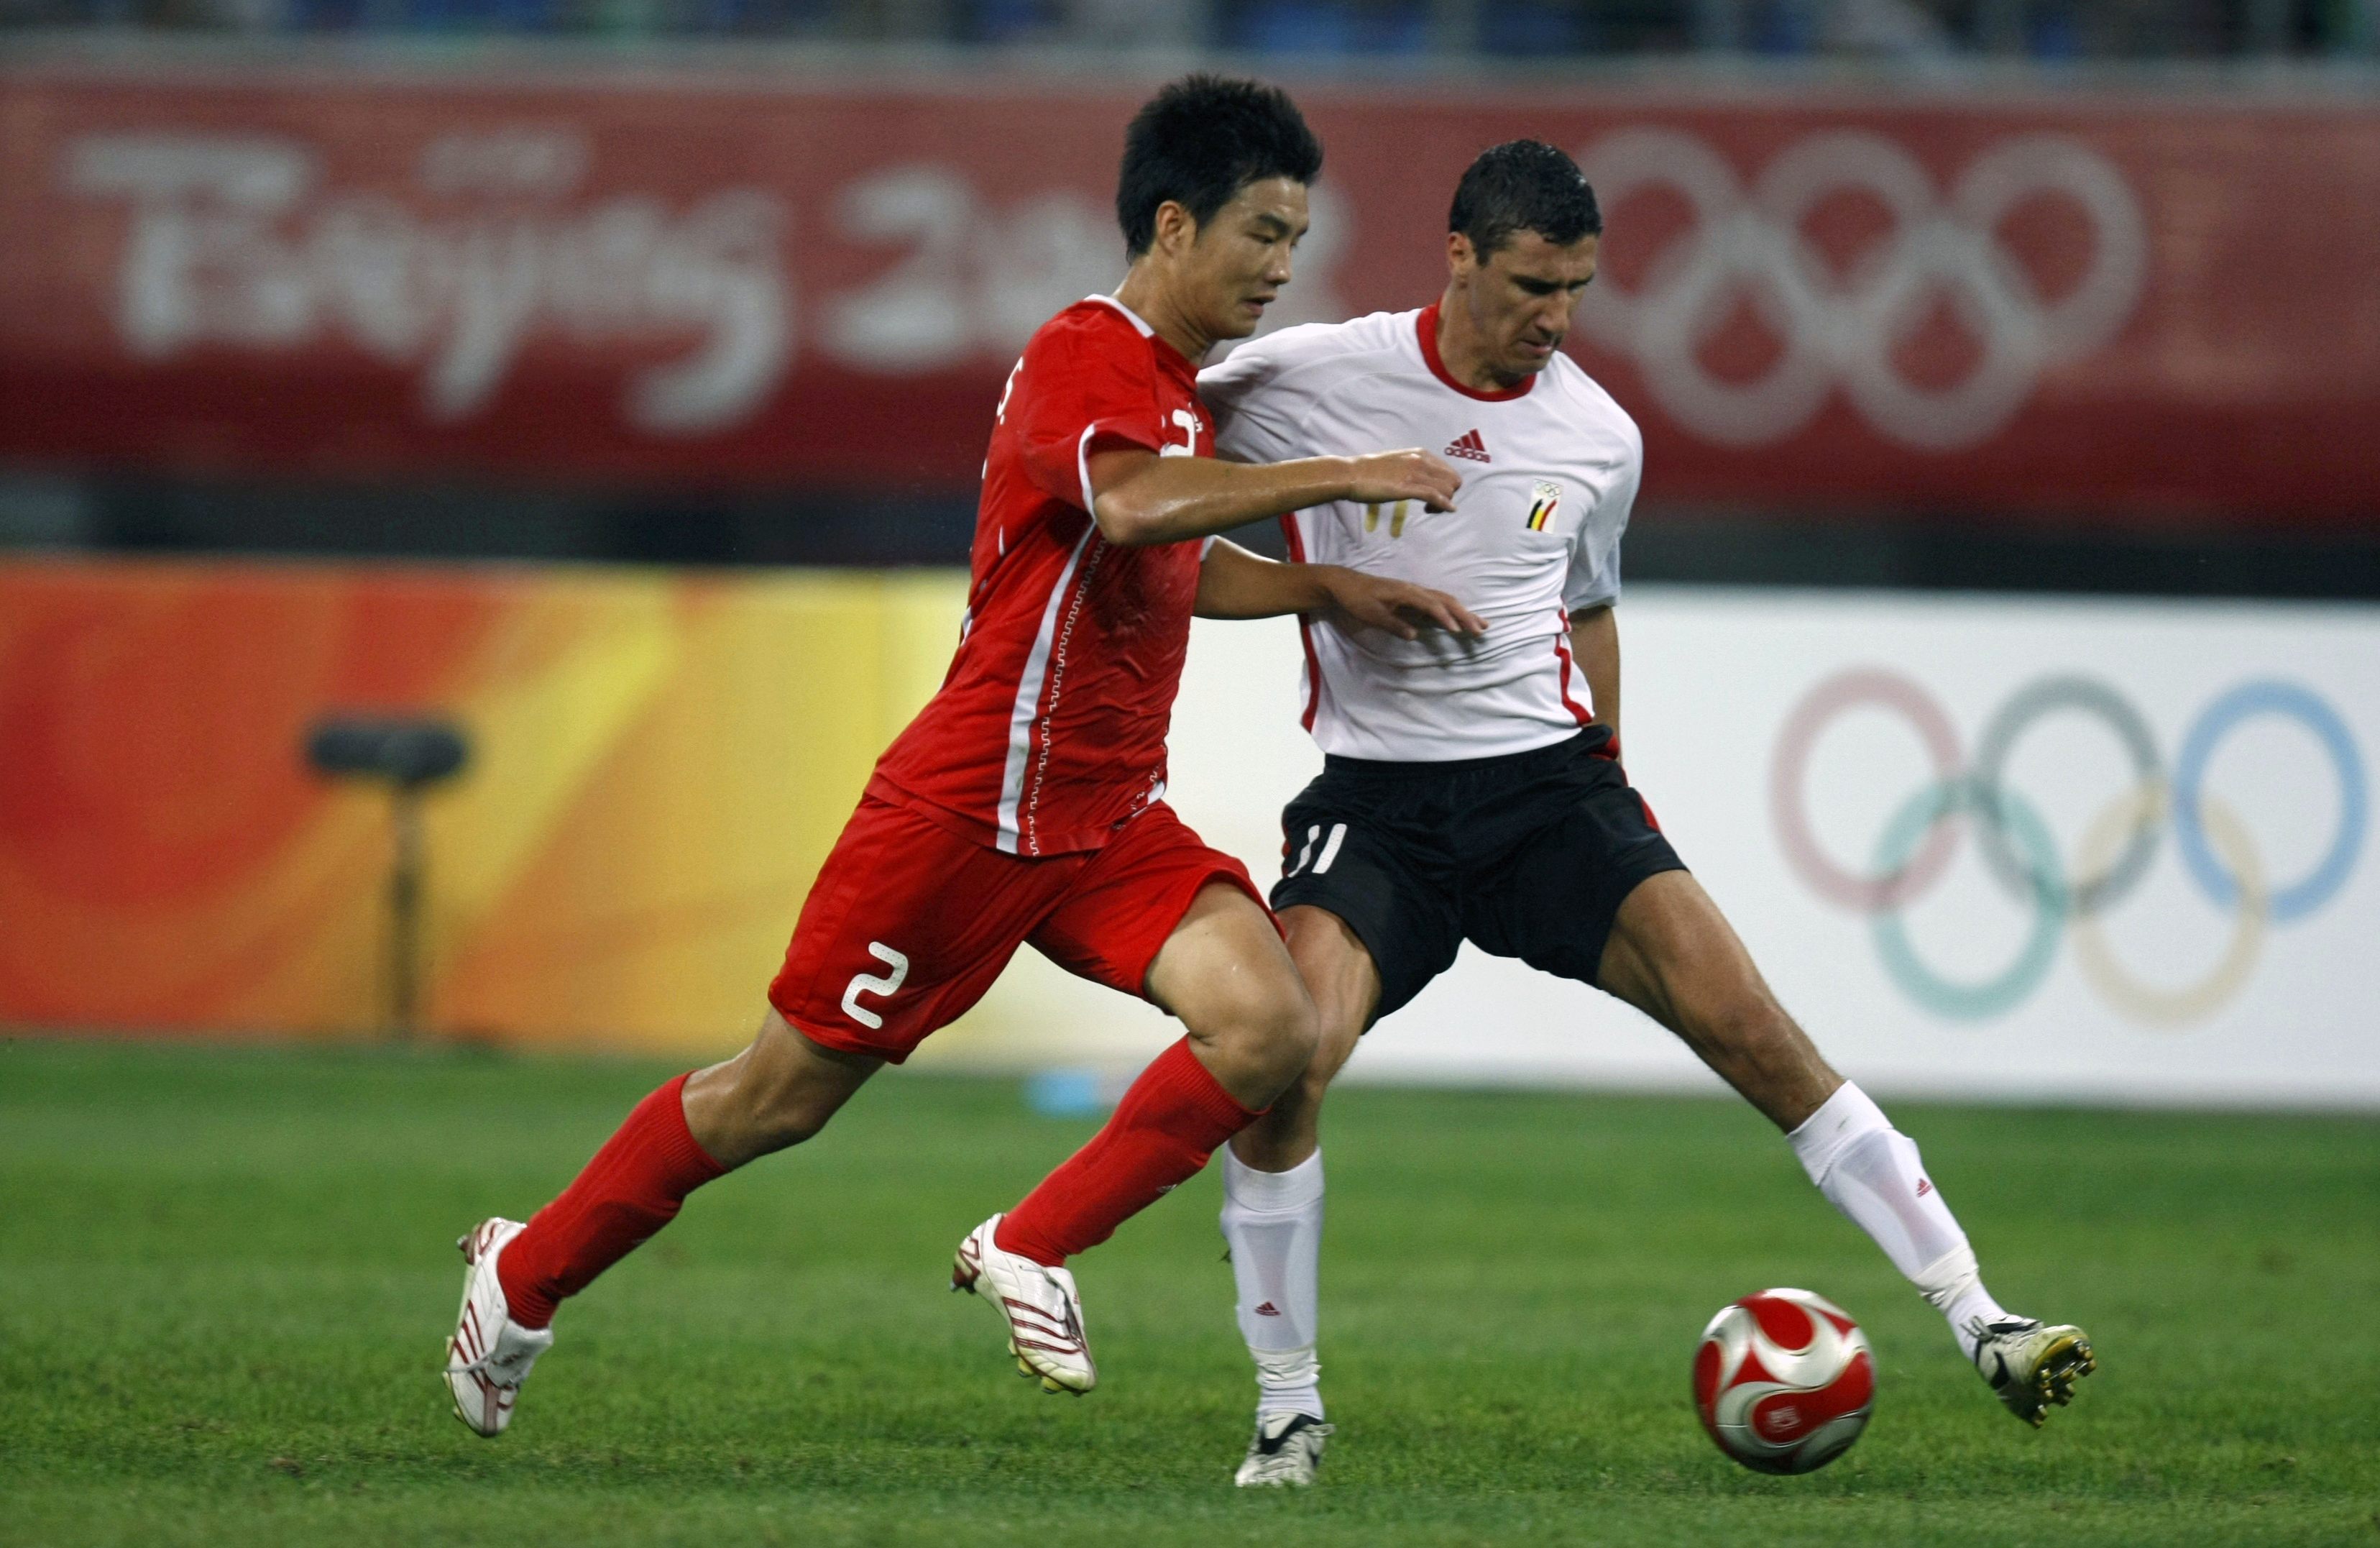 Download this Soccer Match The Beijing Olympic Games Shenyang August picture